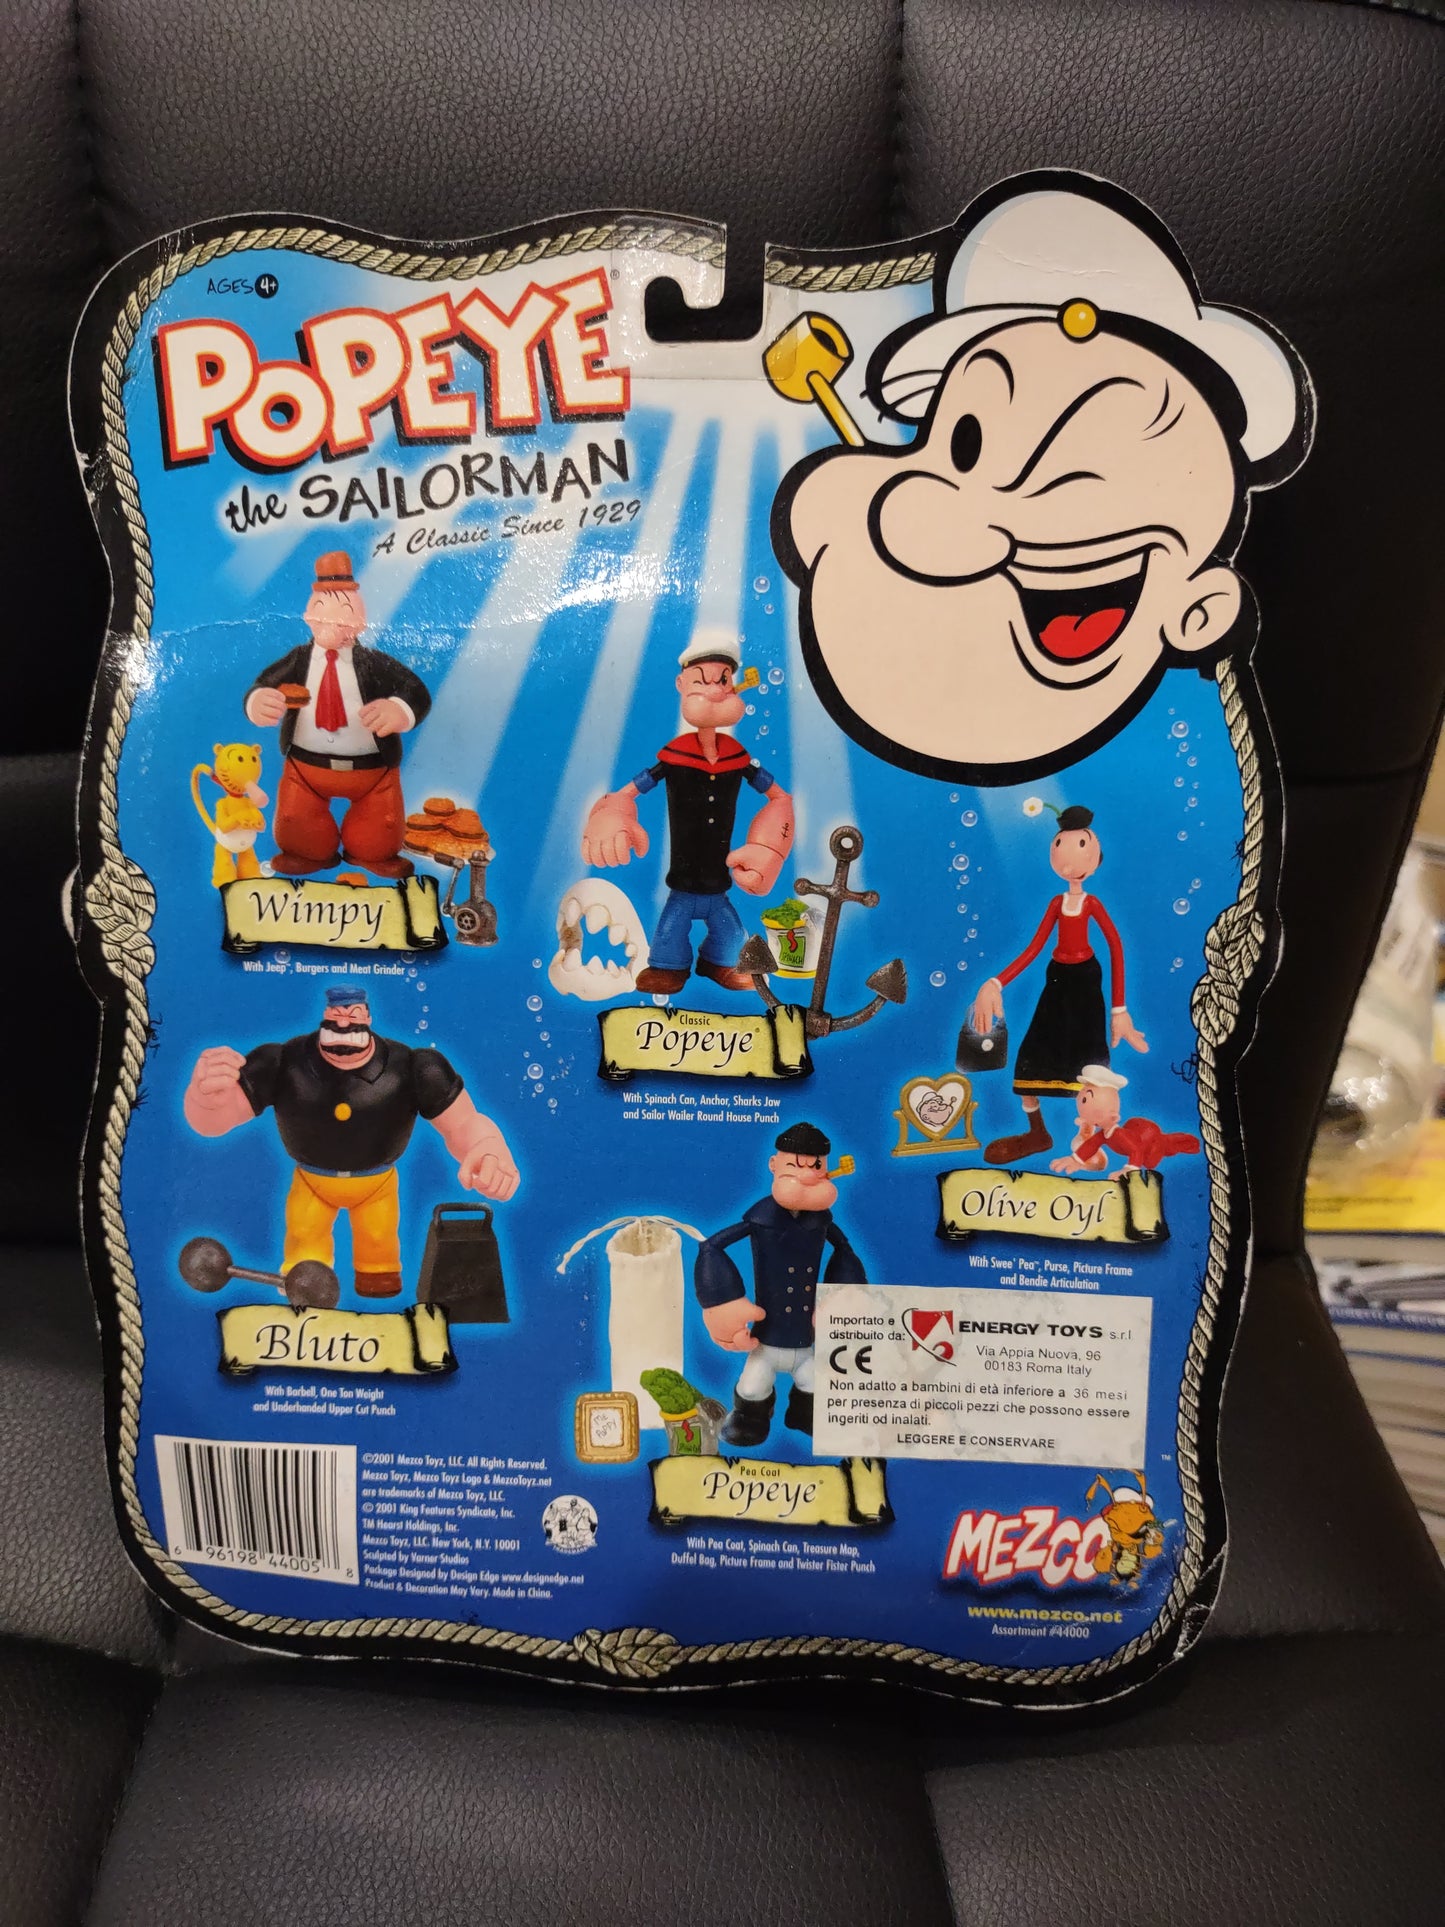 Action figure mezco popeye the sailorman wimpy with jeep burgers and meat grinder